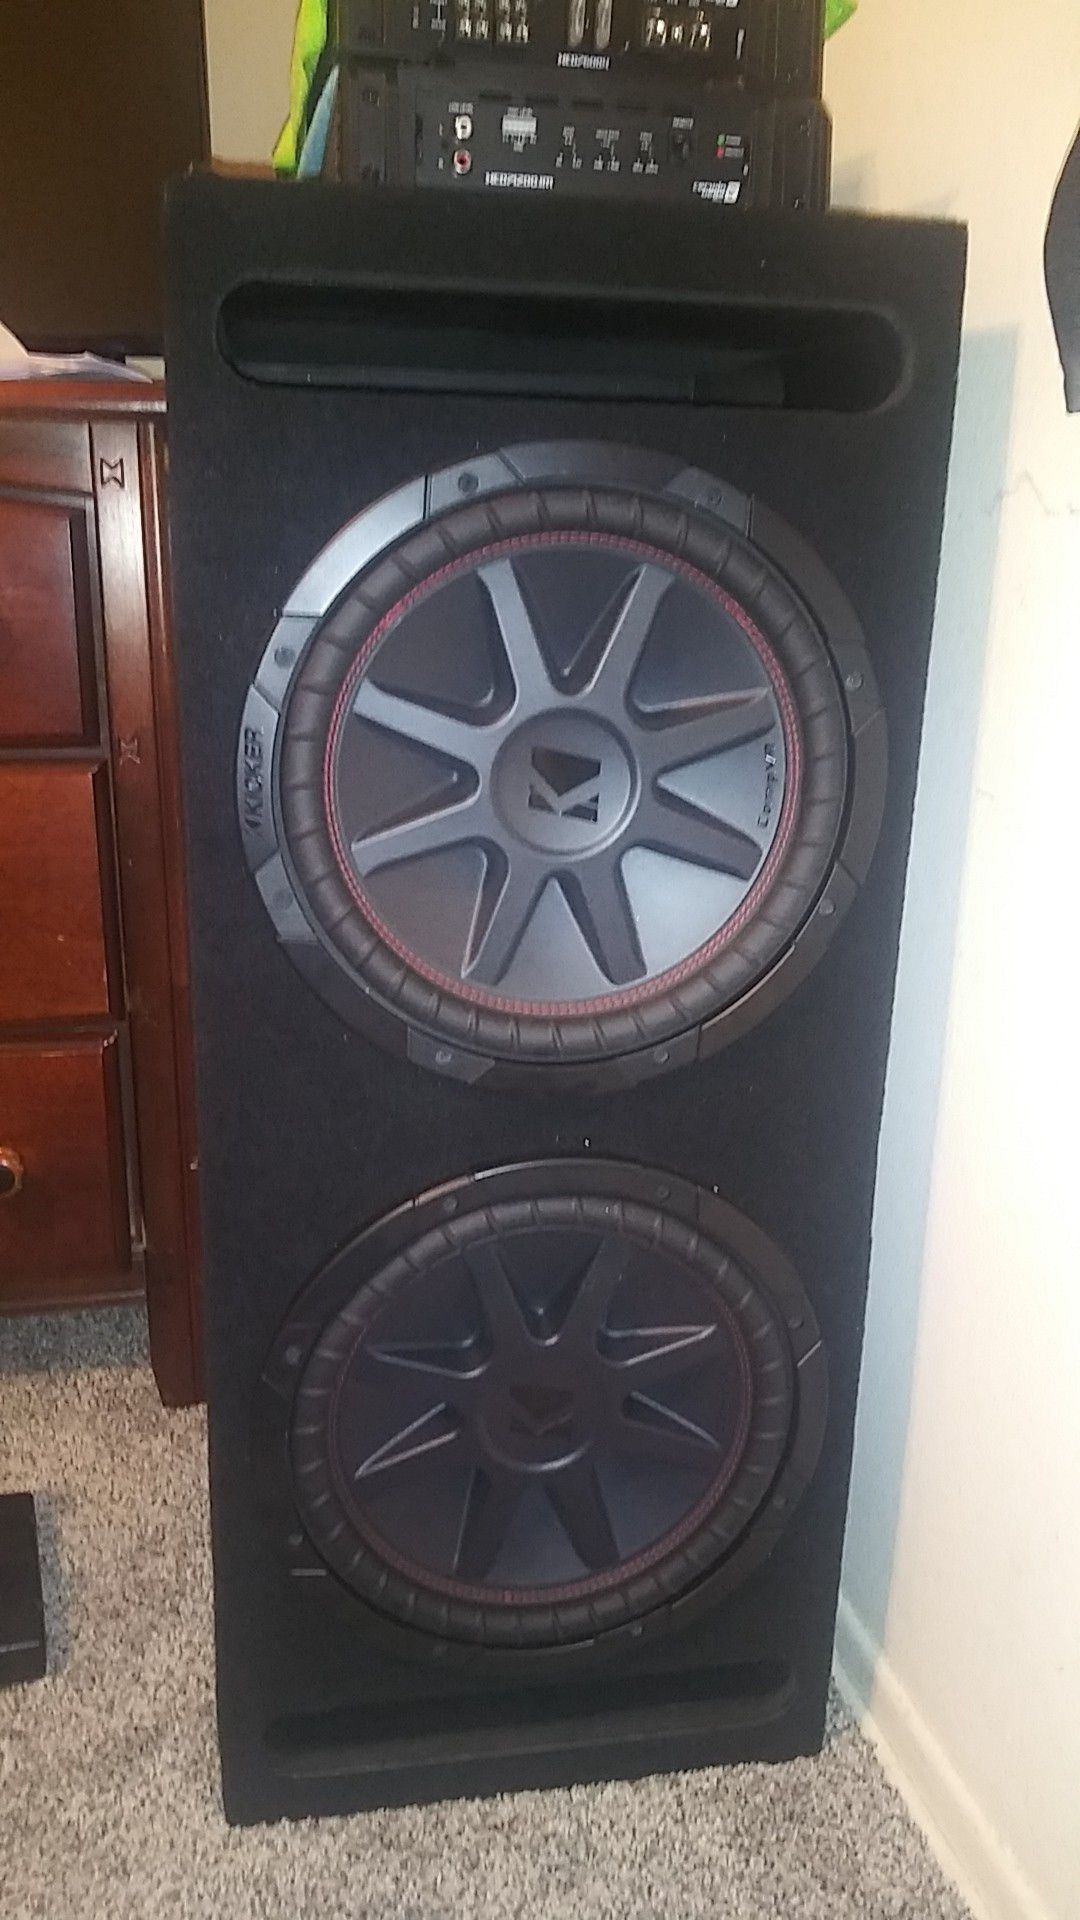 Dual 12in kicker comp vr subs